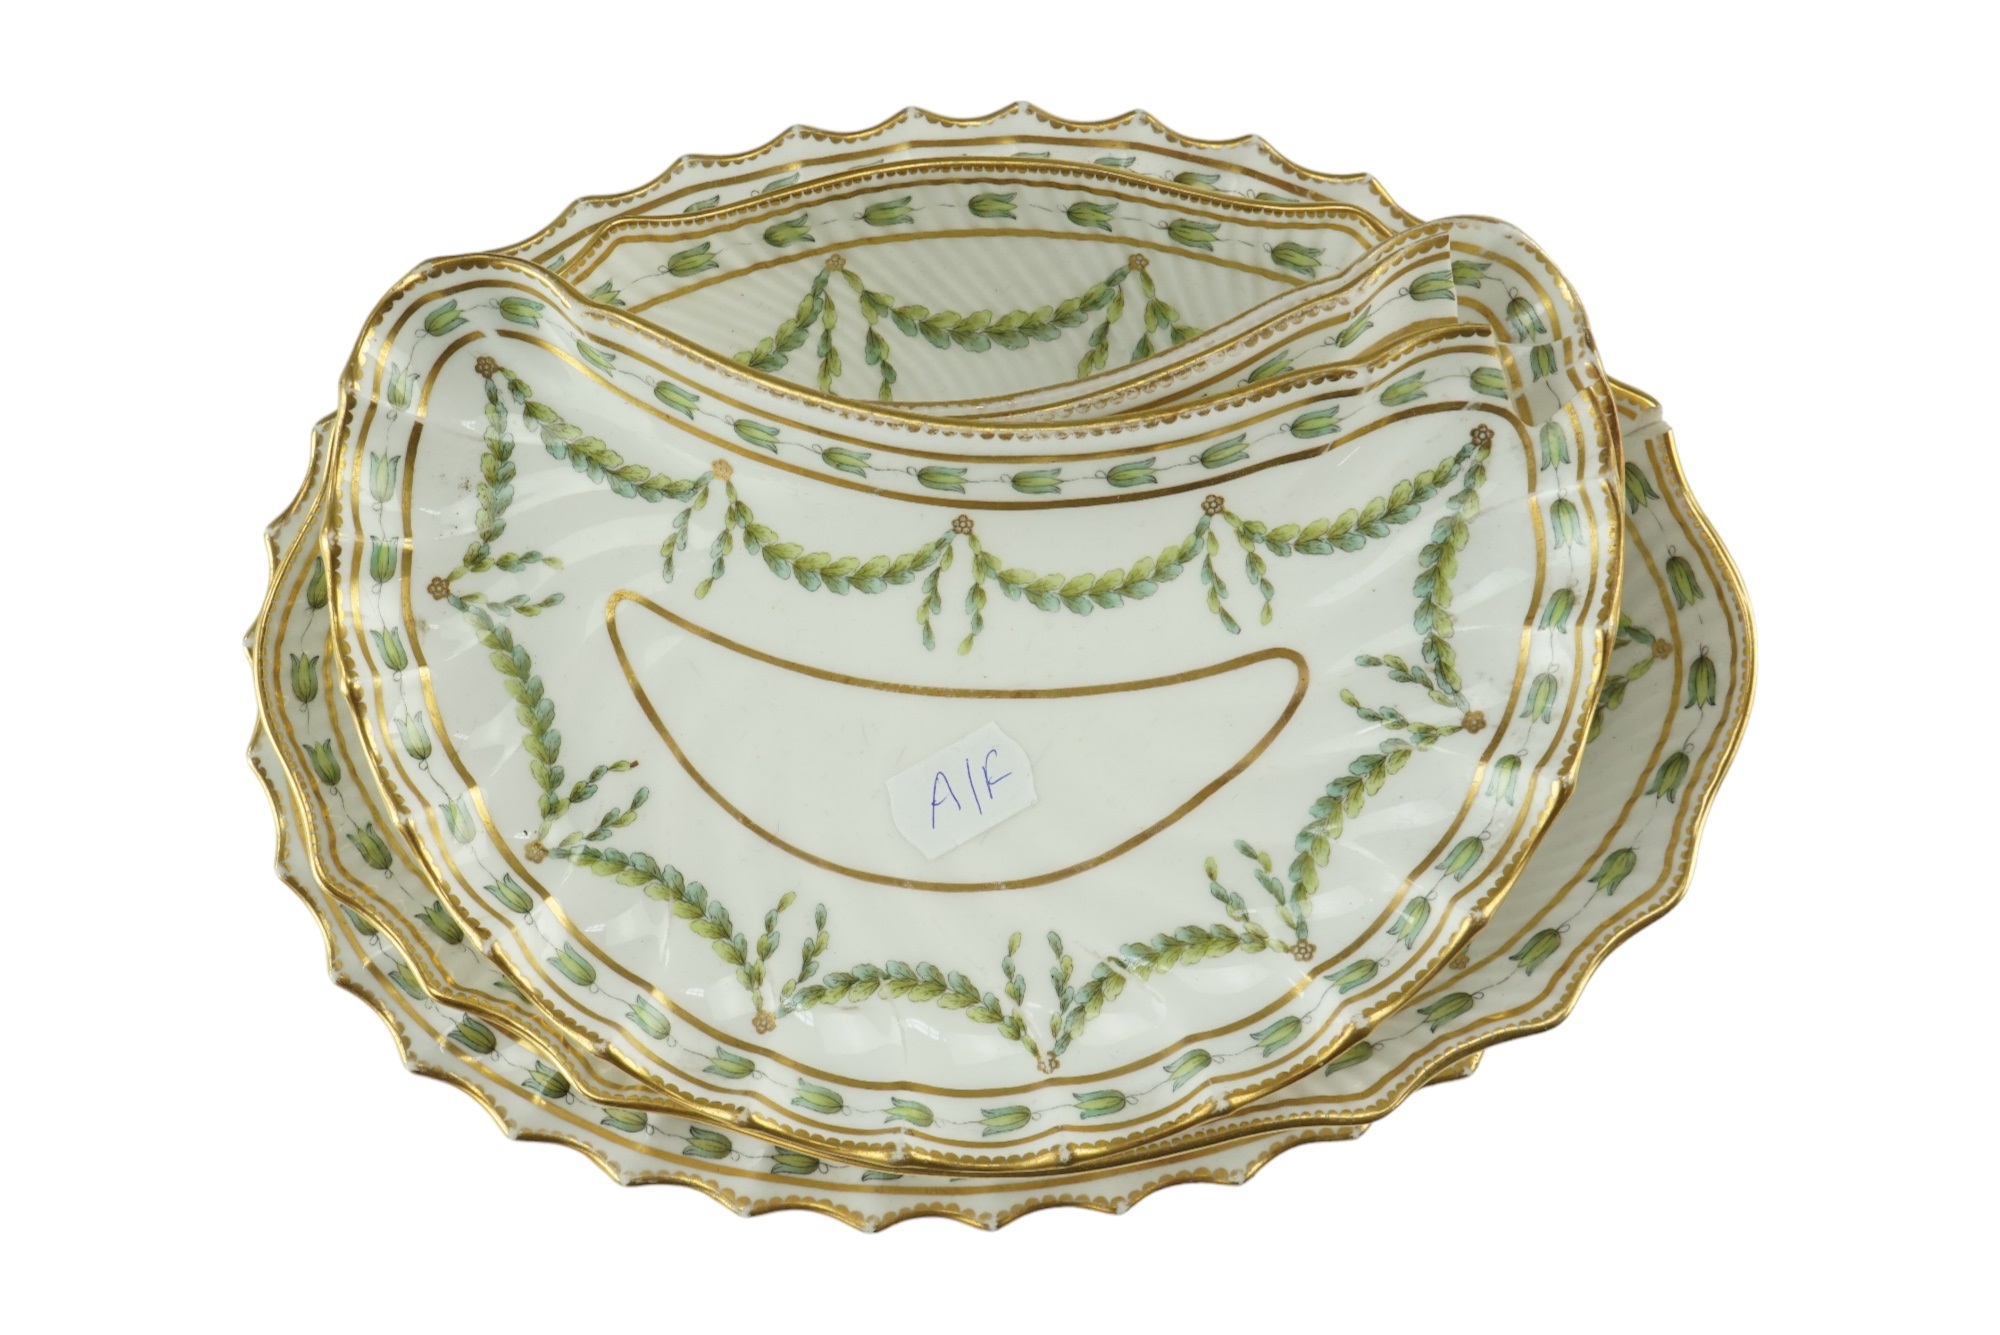 A quantity of early 20th Century Copeland hand-painted dinnerware, decorated with laurel garlands - Image 7 of 7